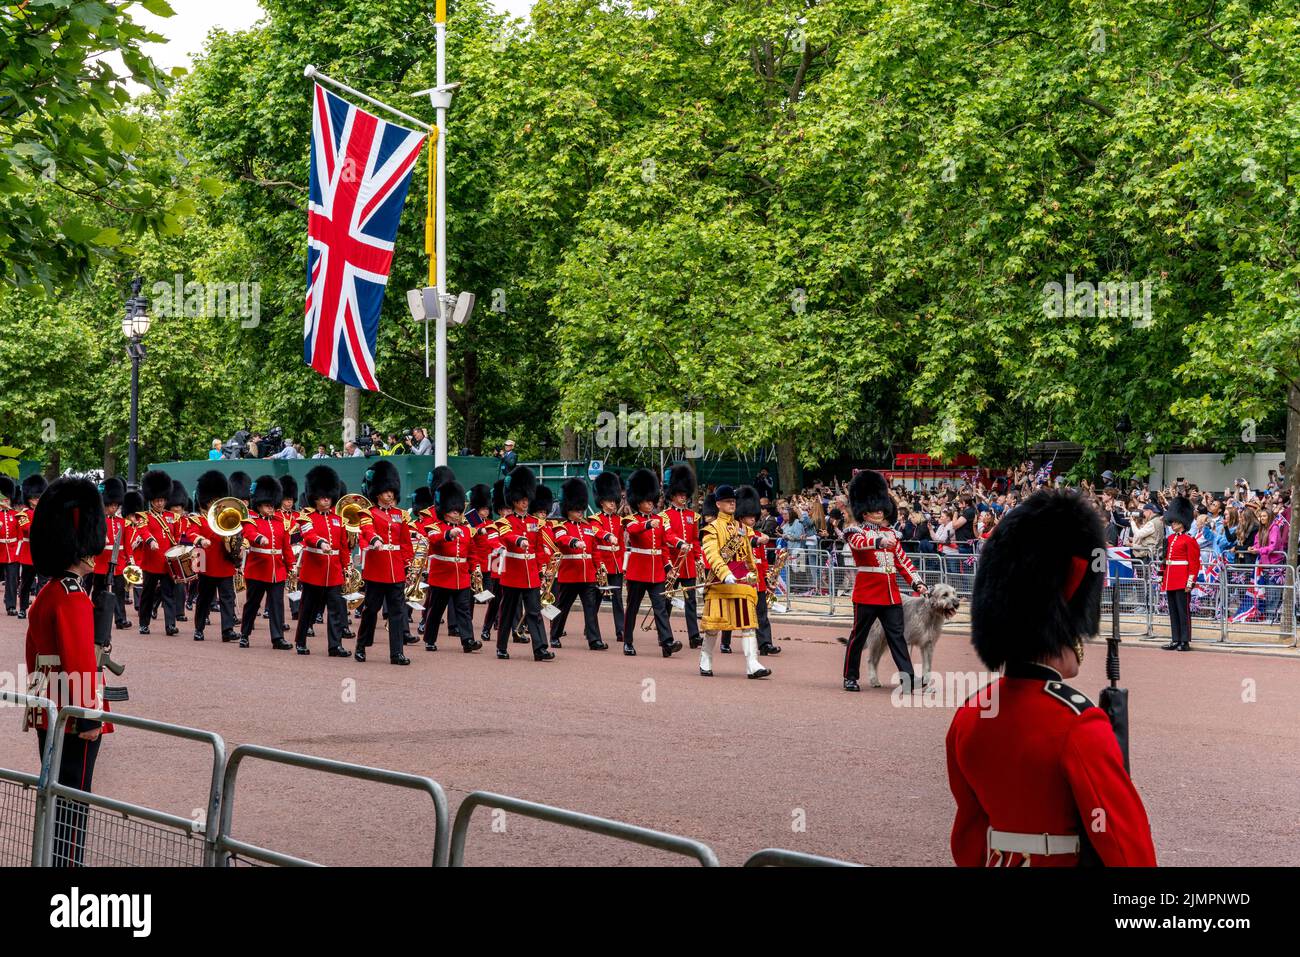 The First Battalion Irish Guards Together With 'Seamus' Their Irish Wolfhound Mascot Take Part In The Queen's Birthday Parade, London, UK. Stock Photo